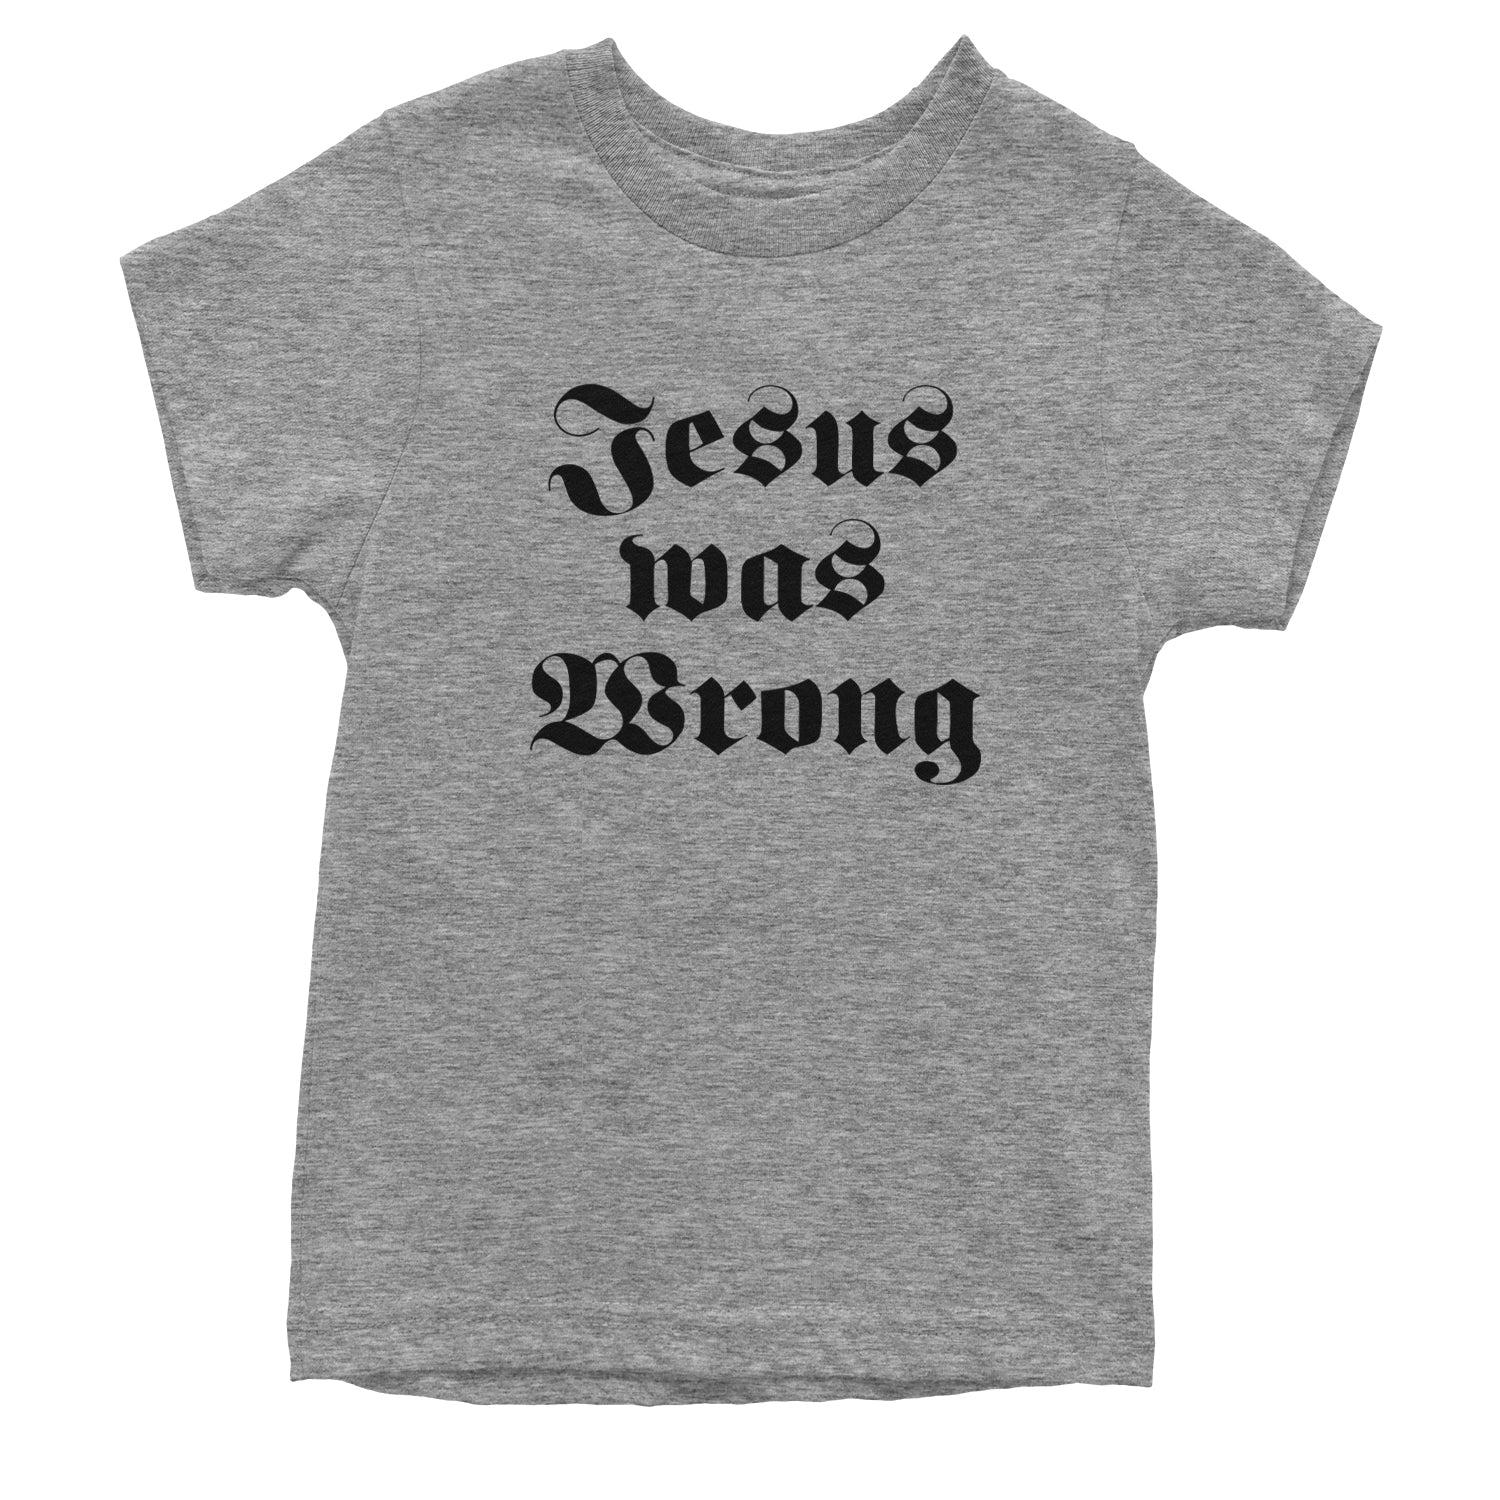 Jesus Was Wrong Little Miss Sunshine Youth T-shirt breslin, dano, movie, paul, shine, shirt, sun by Expression Tees